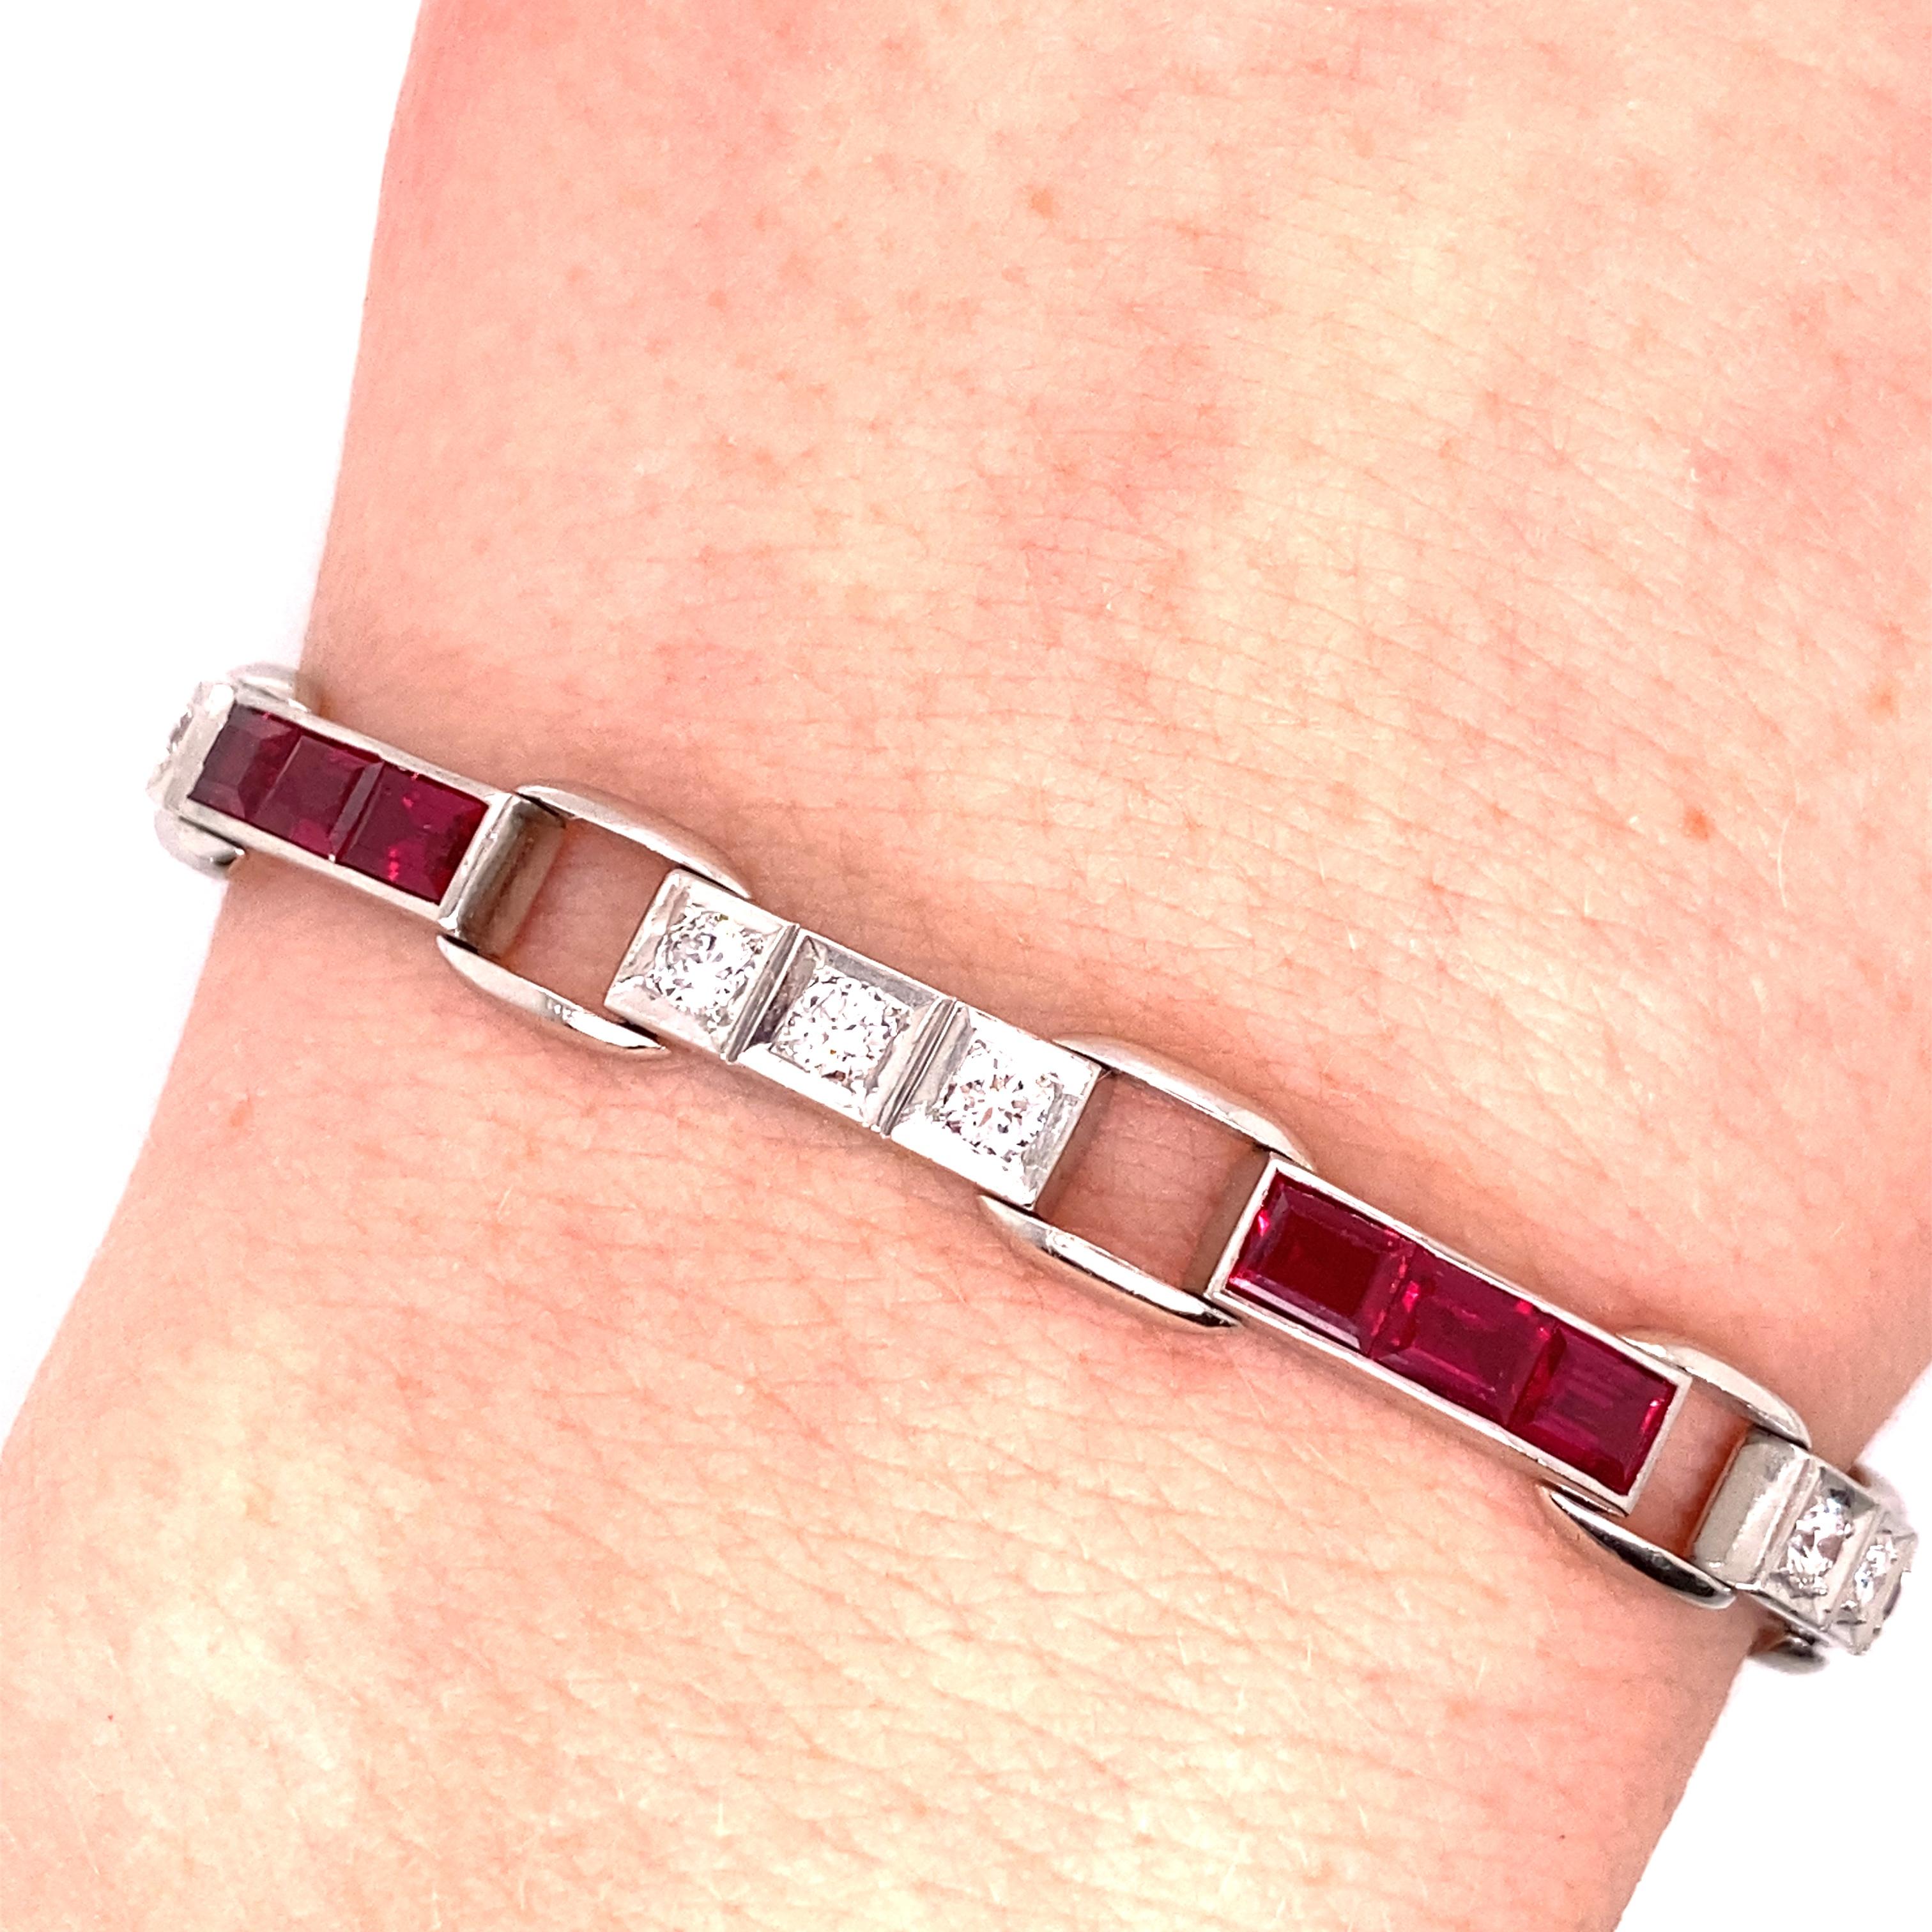 Vintage 1950's Platinum Diamond and Synthetic Ruby Bracelet 1.25ct - The bracelet contains 15 synthetic baguette Rubies which are channel set. There are 15 round diamonds that weigh approximately 1.25ct with G- H color and SI clarity. The diamonds